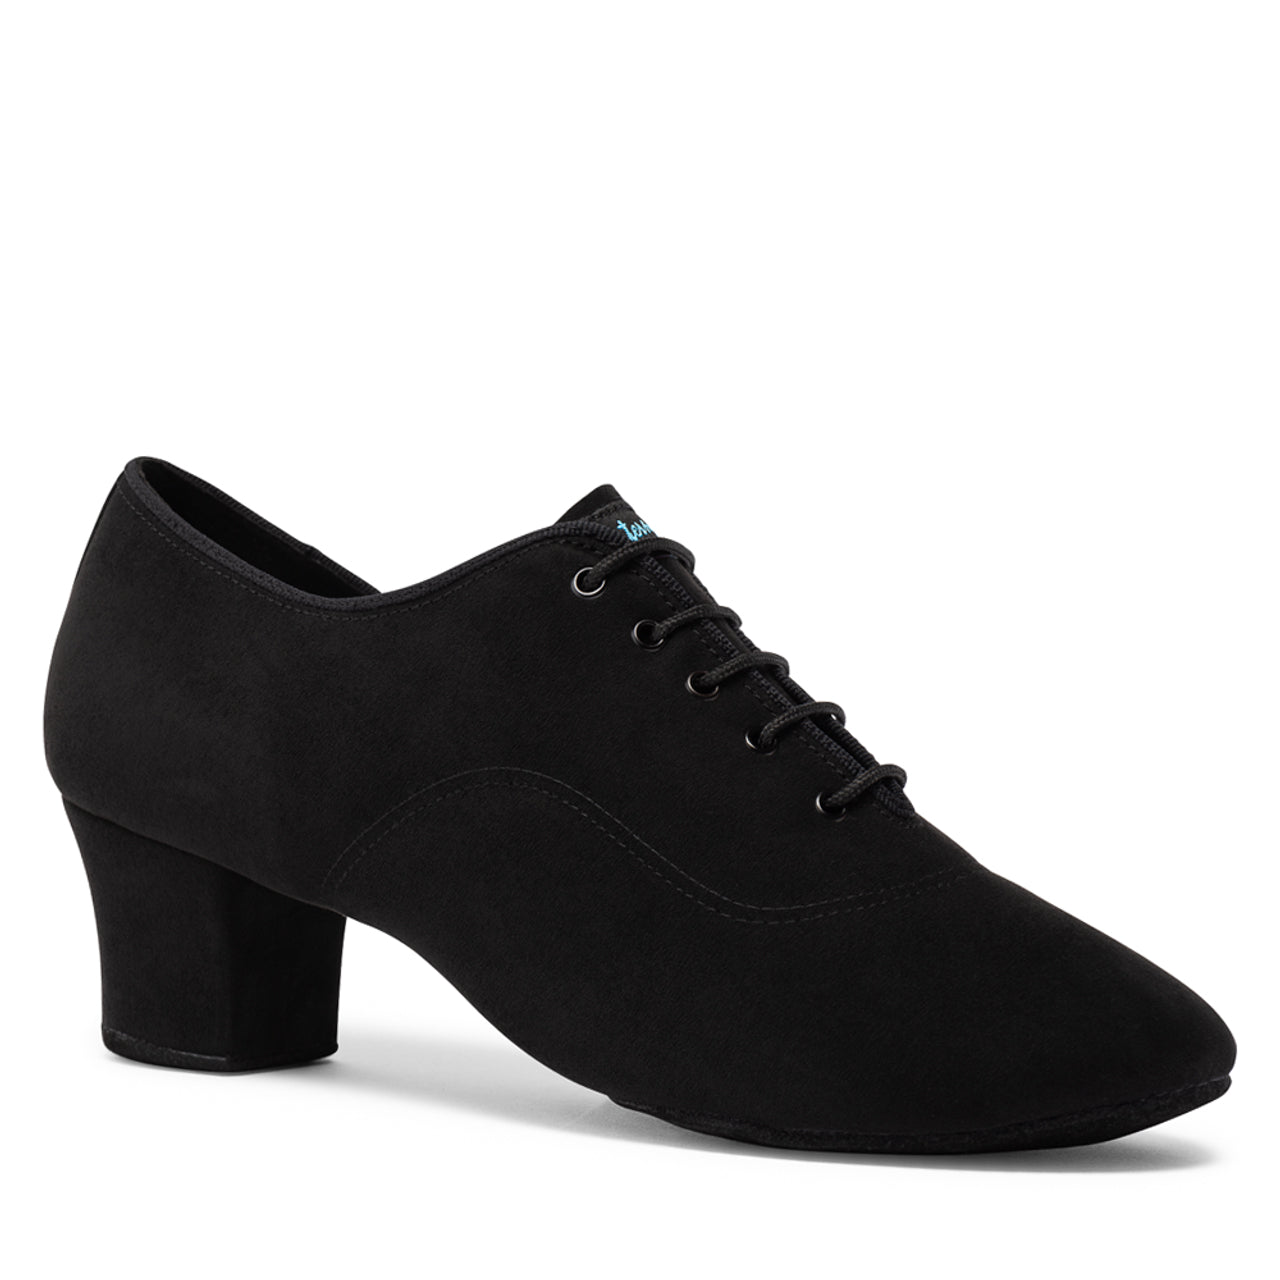 International Dance Shoes IDS Latin Men's Ballroom Dance Shoe Available in Multiple Material Options and Heel Heights RUMBA in Stock